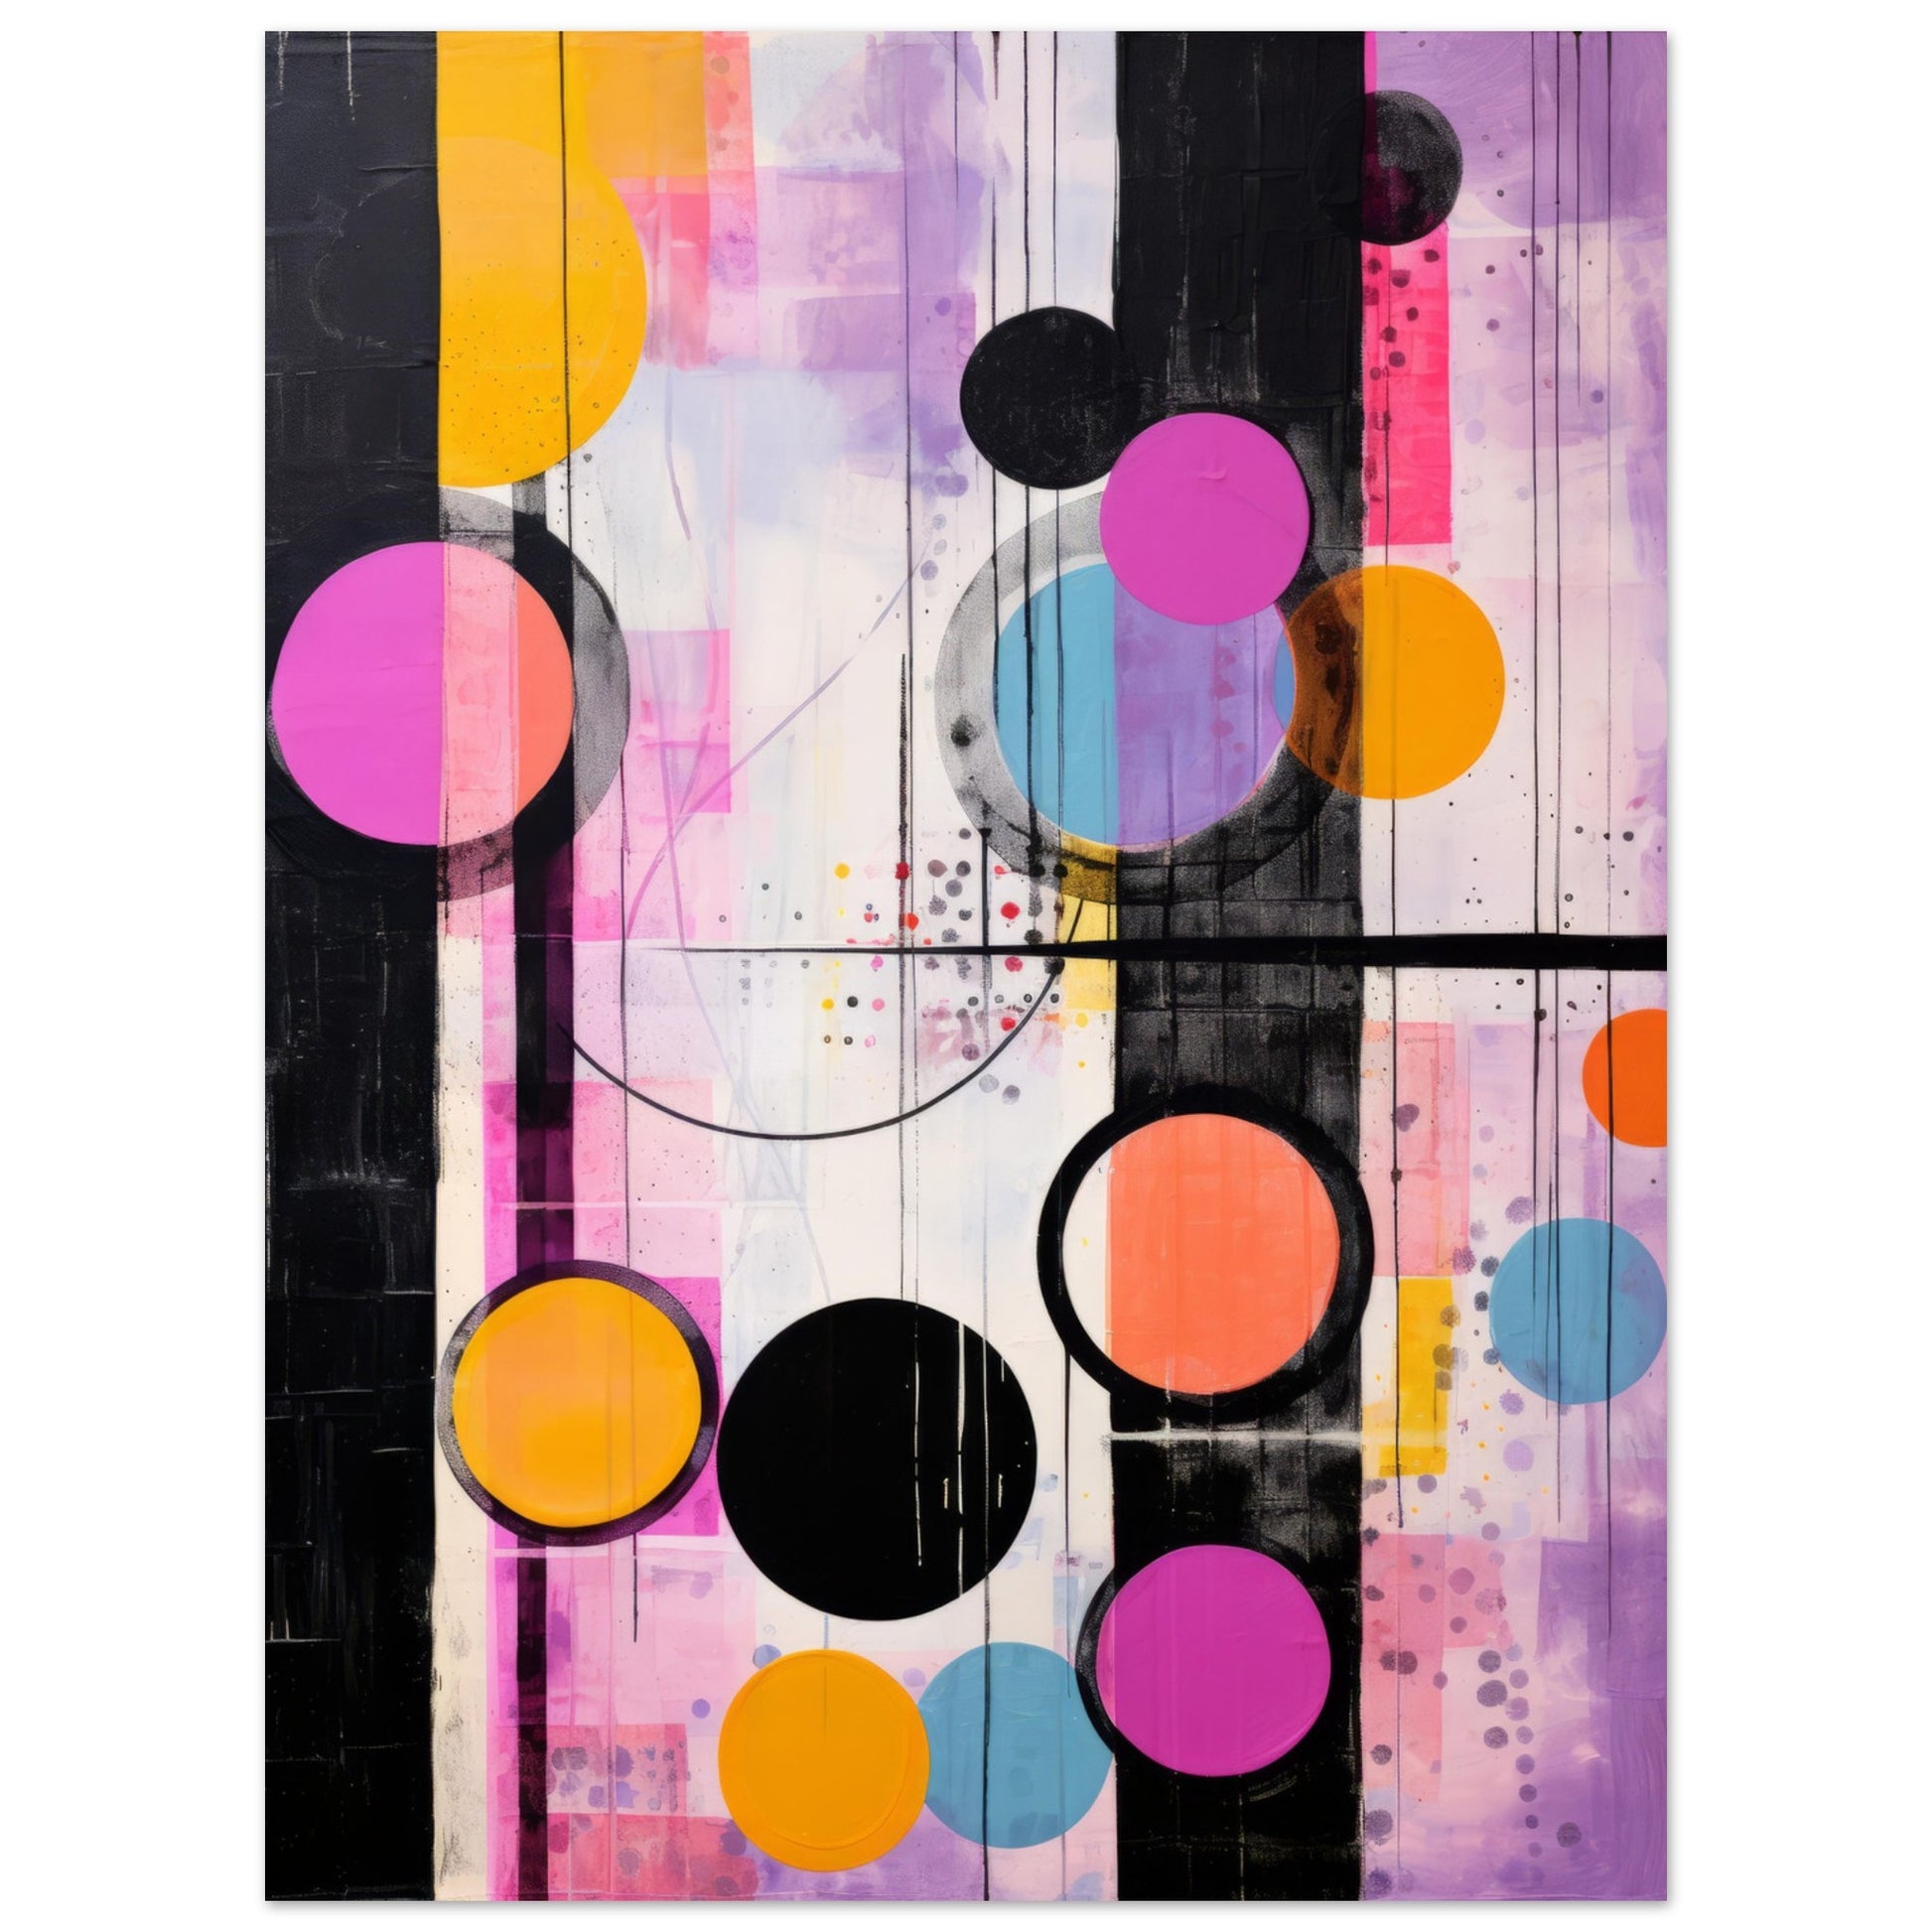 Vibrant abstract wall art titled "Back Then," featuring a plethora of circles in hot pink, blue, black, and orange hues, set against a textured backdrop with vertical lines, capturing the interplay of nostalgia and the present in a contemporary design.